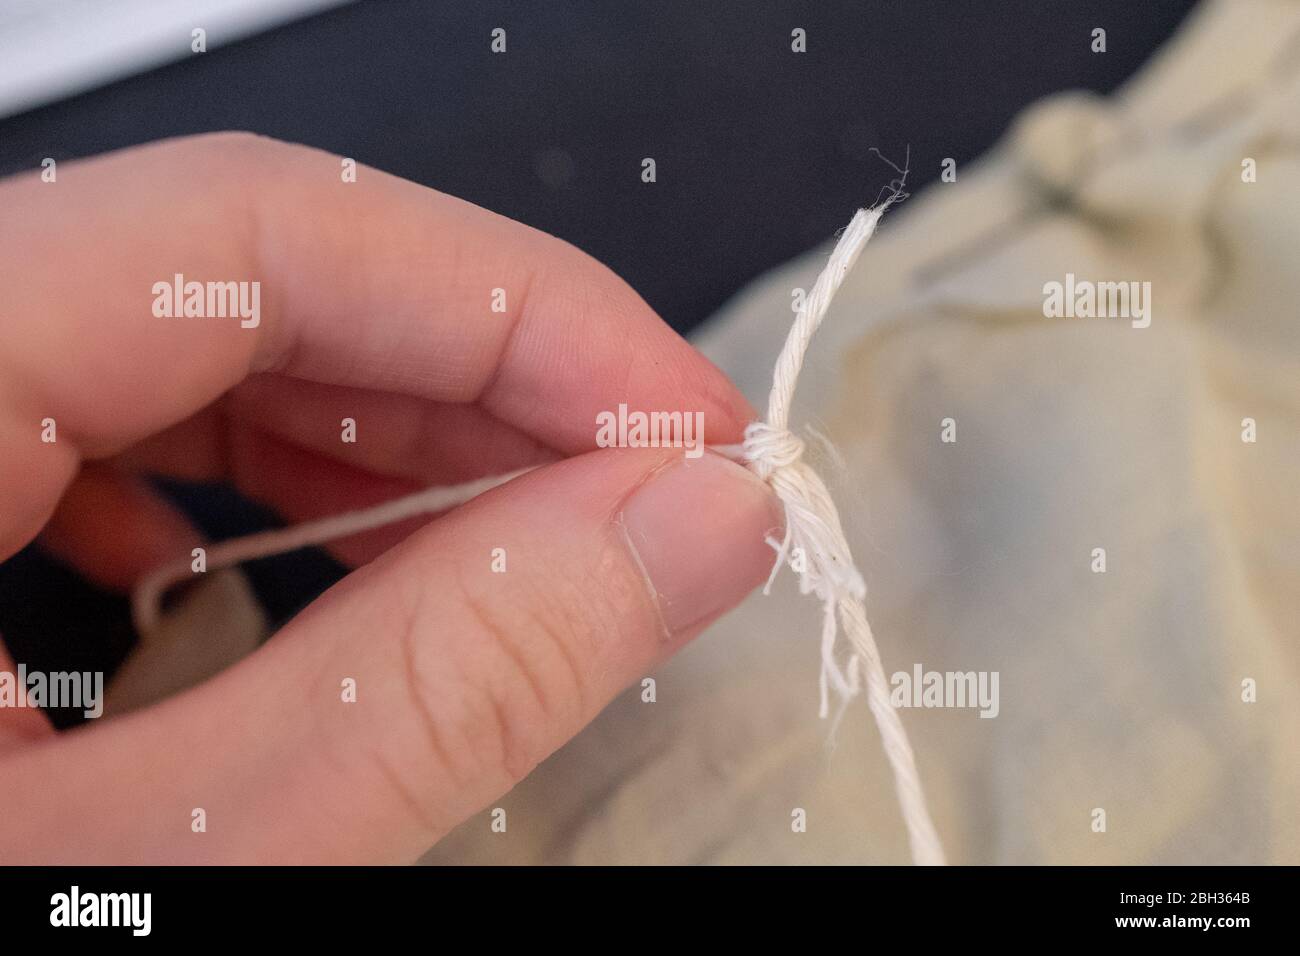 Construction of a homemade cloth face mask, based on the guidelines and sewing directions provided by the Centers for Disease Control and Prevention (CDC), during an outbreak of the COVID-19 coronavirus, San Ramon, California, April 17, 2020. () Stock Photo